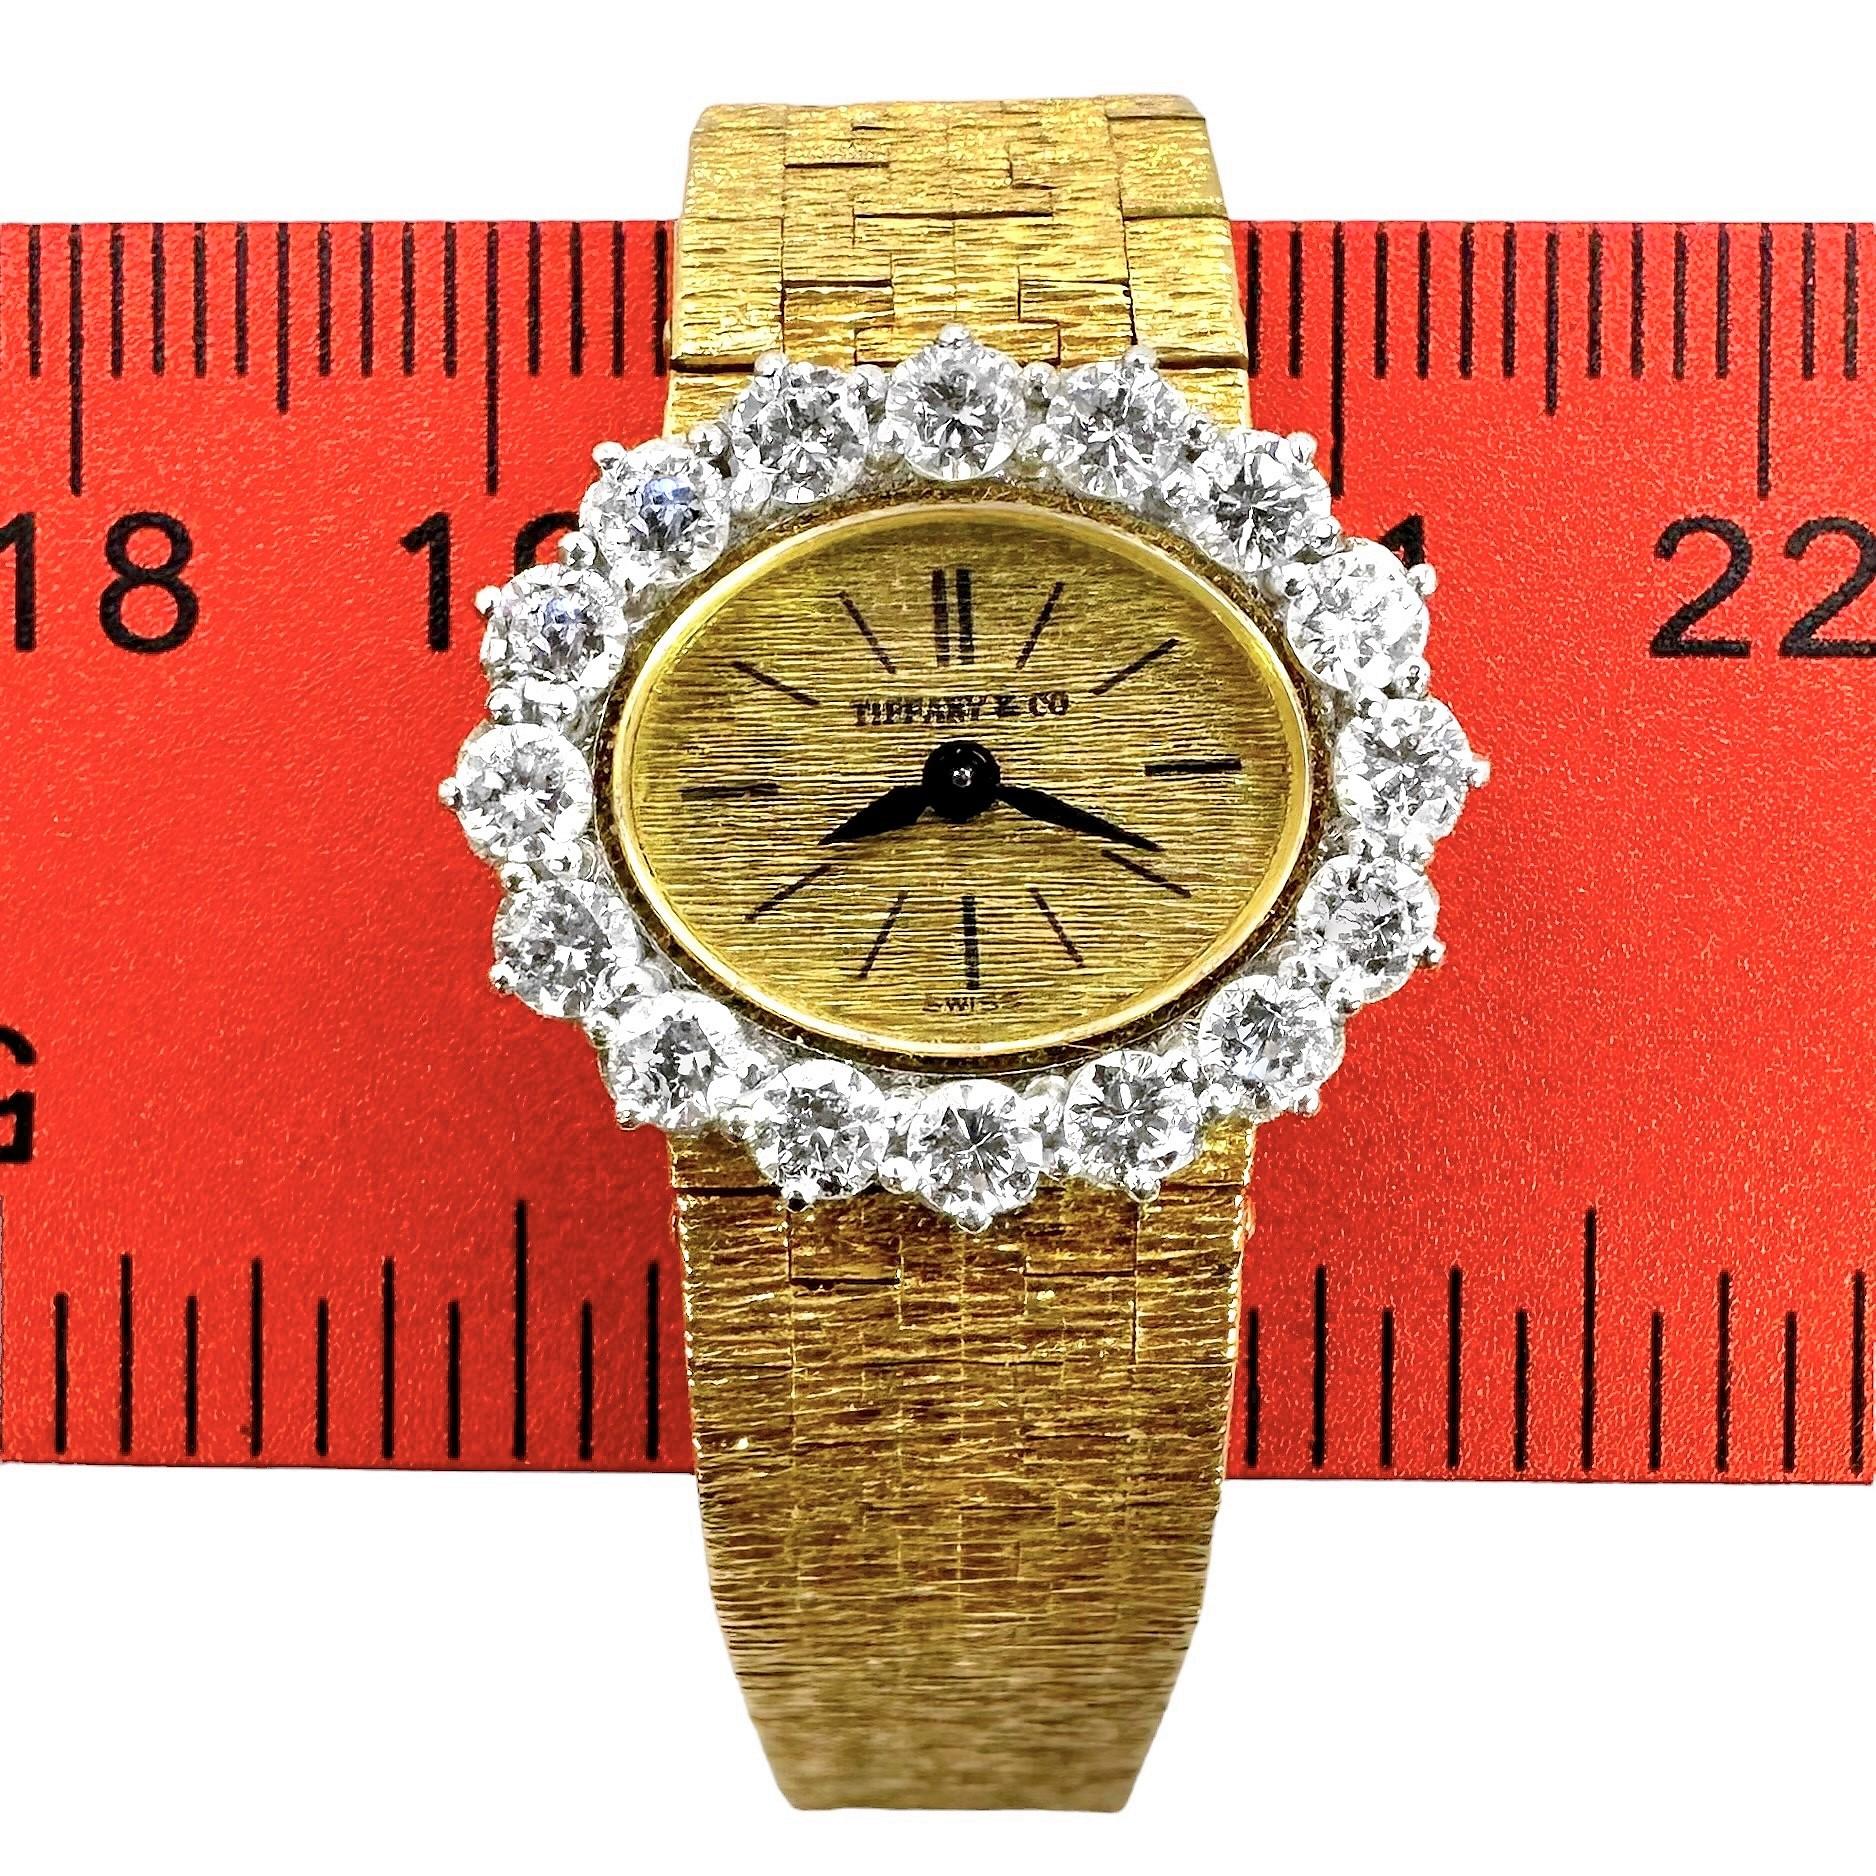 Vintage Ladies 18k Gold Tiffany & Co Wrist Watch with Diamond Bezel by Piaget For Sale 1